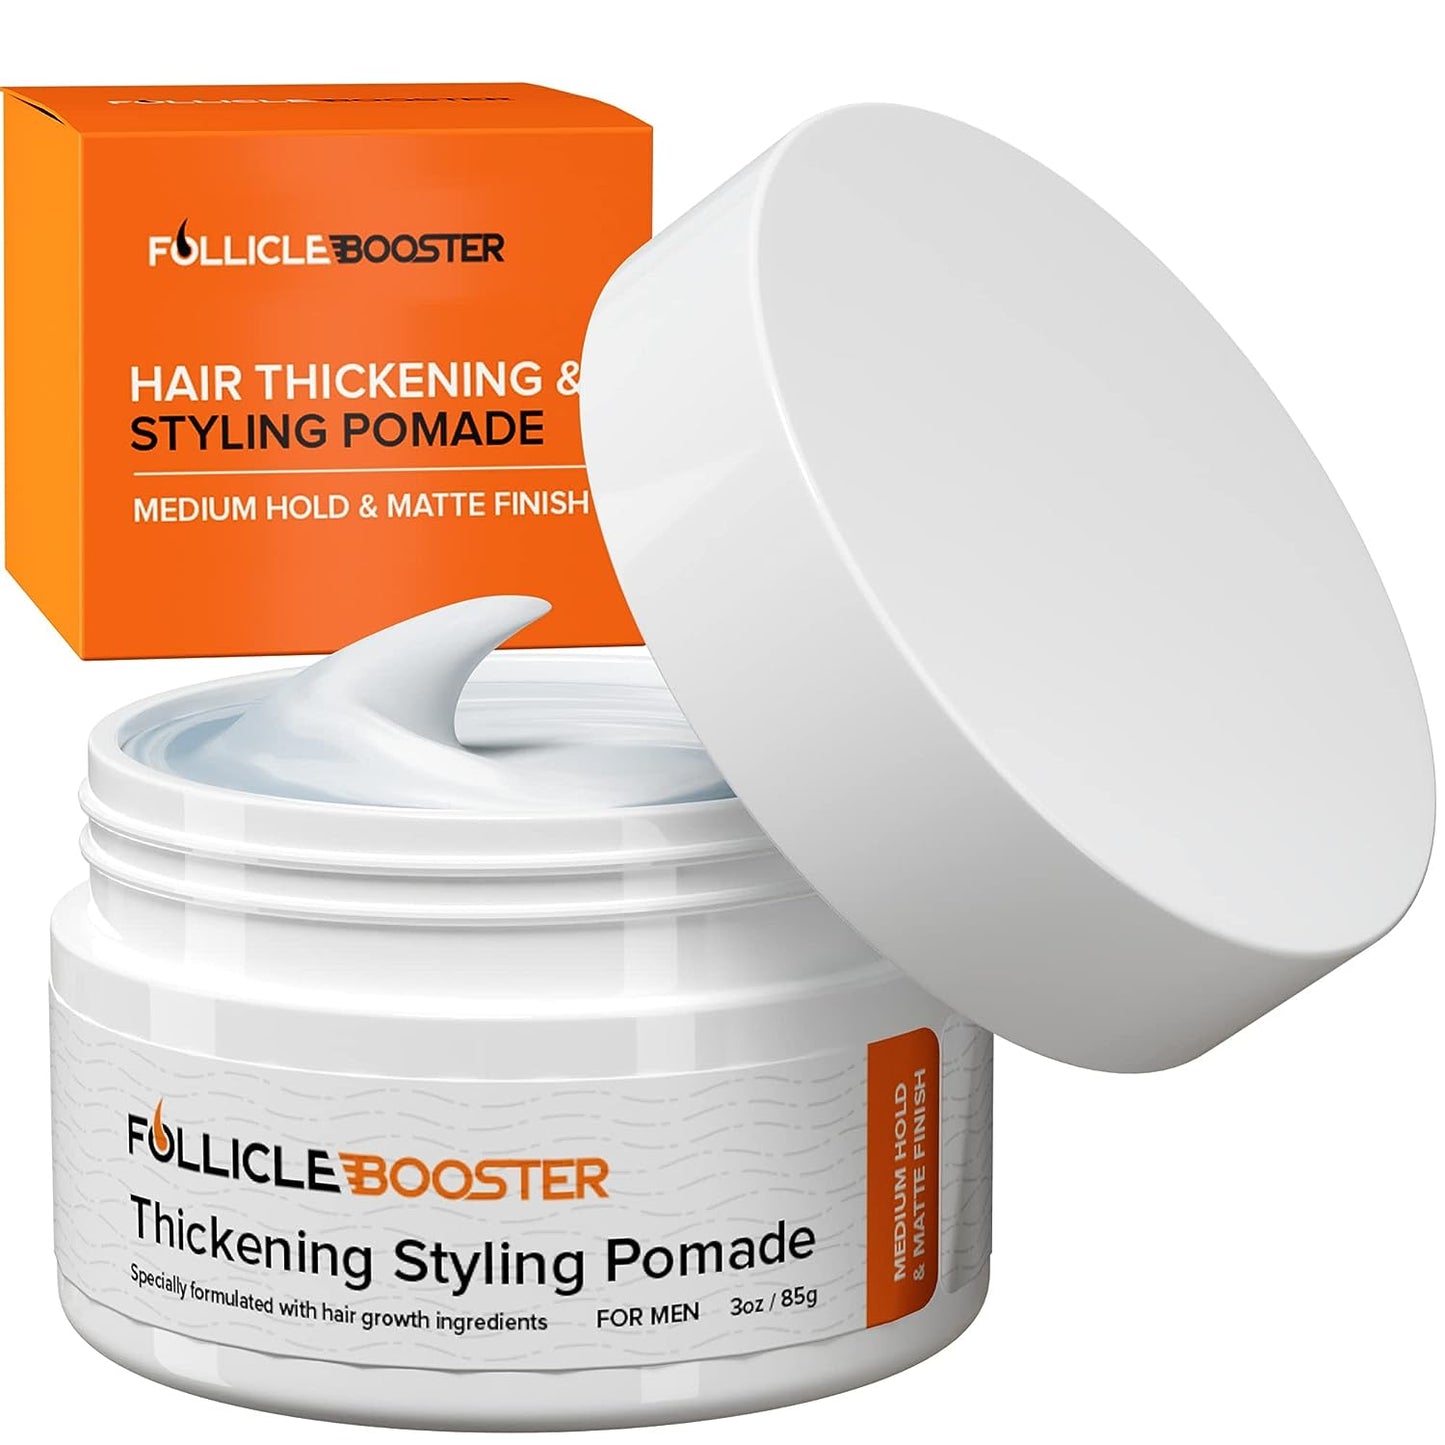 Hair Styling Thickening Pomade - Matte Medium Hold - Follicle Booster